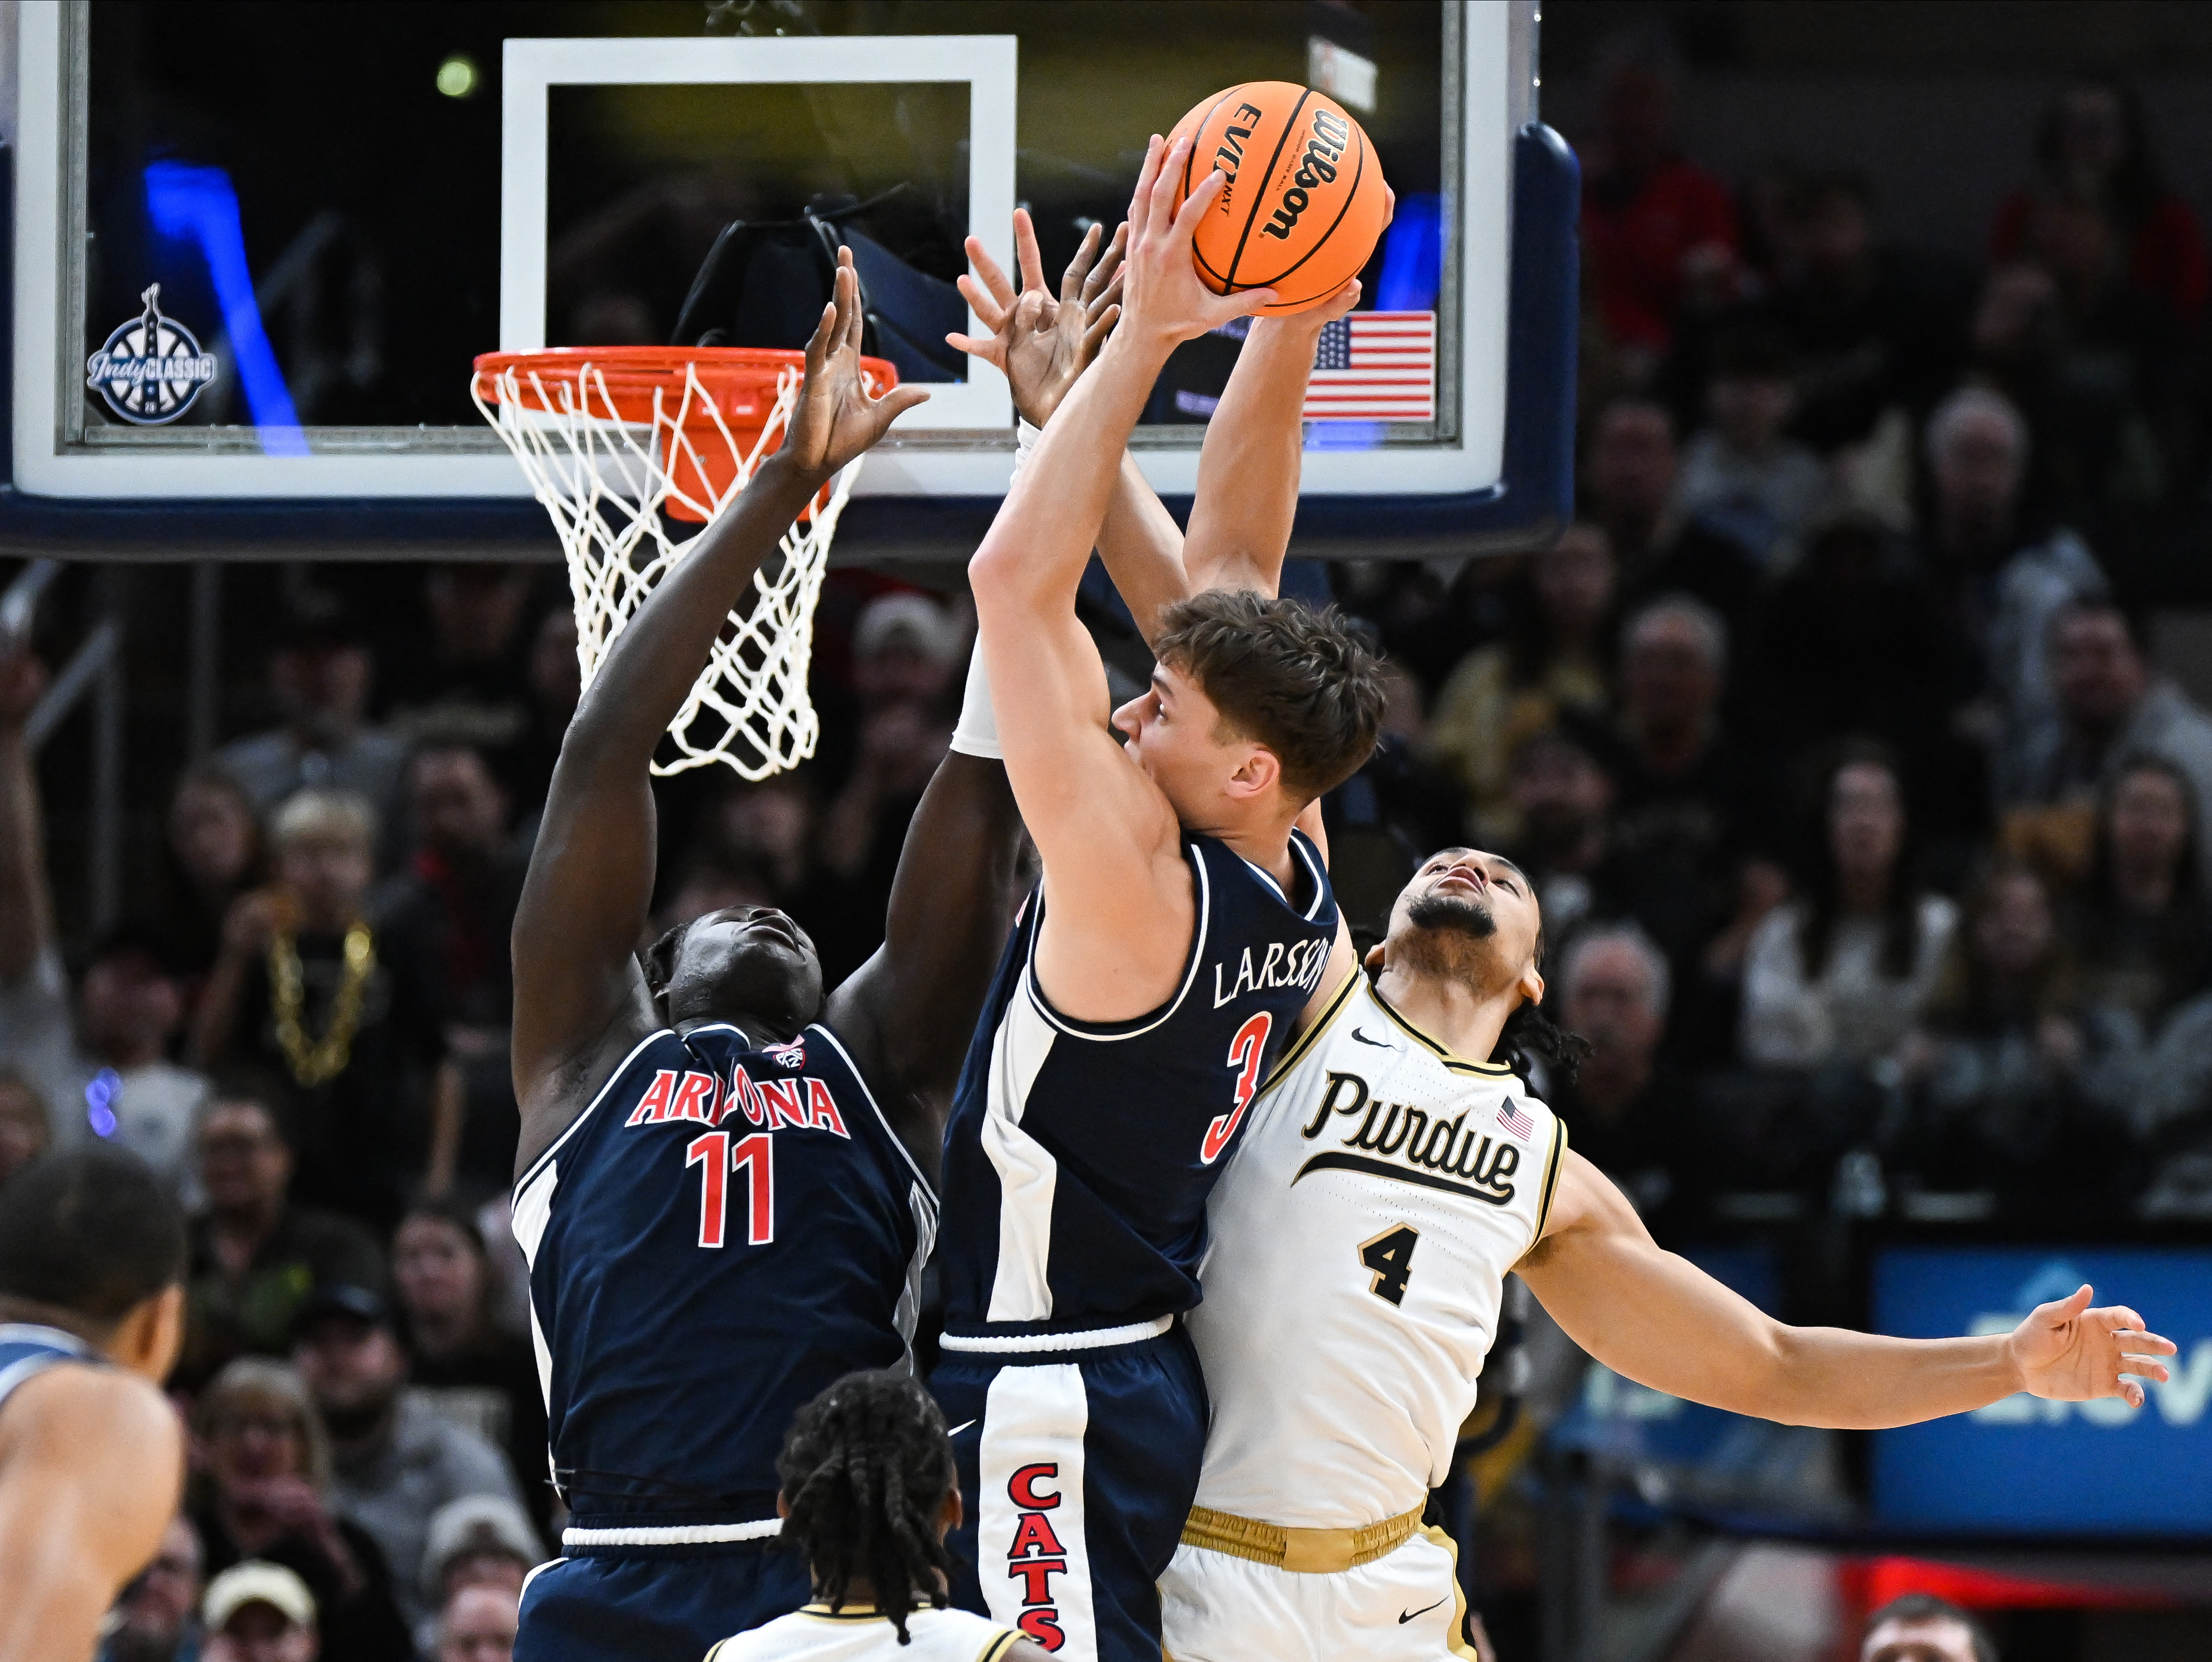 Purdue to Battle Arizona in 2023 Indy Classic - Purdue Boilermakers